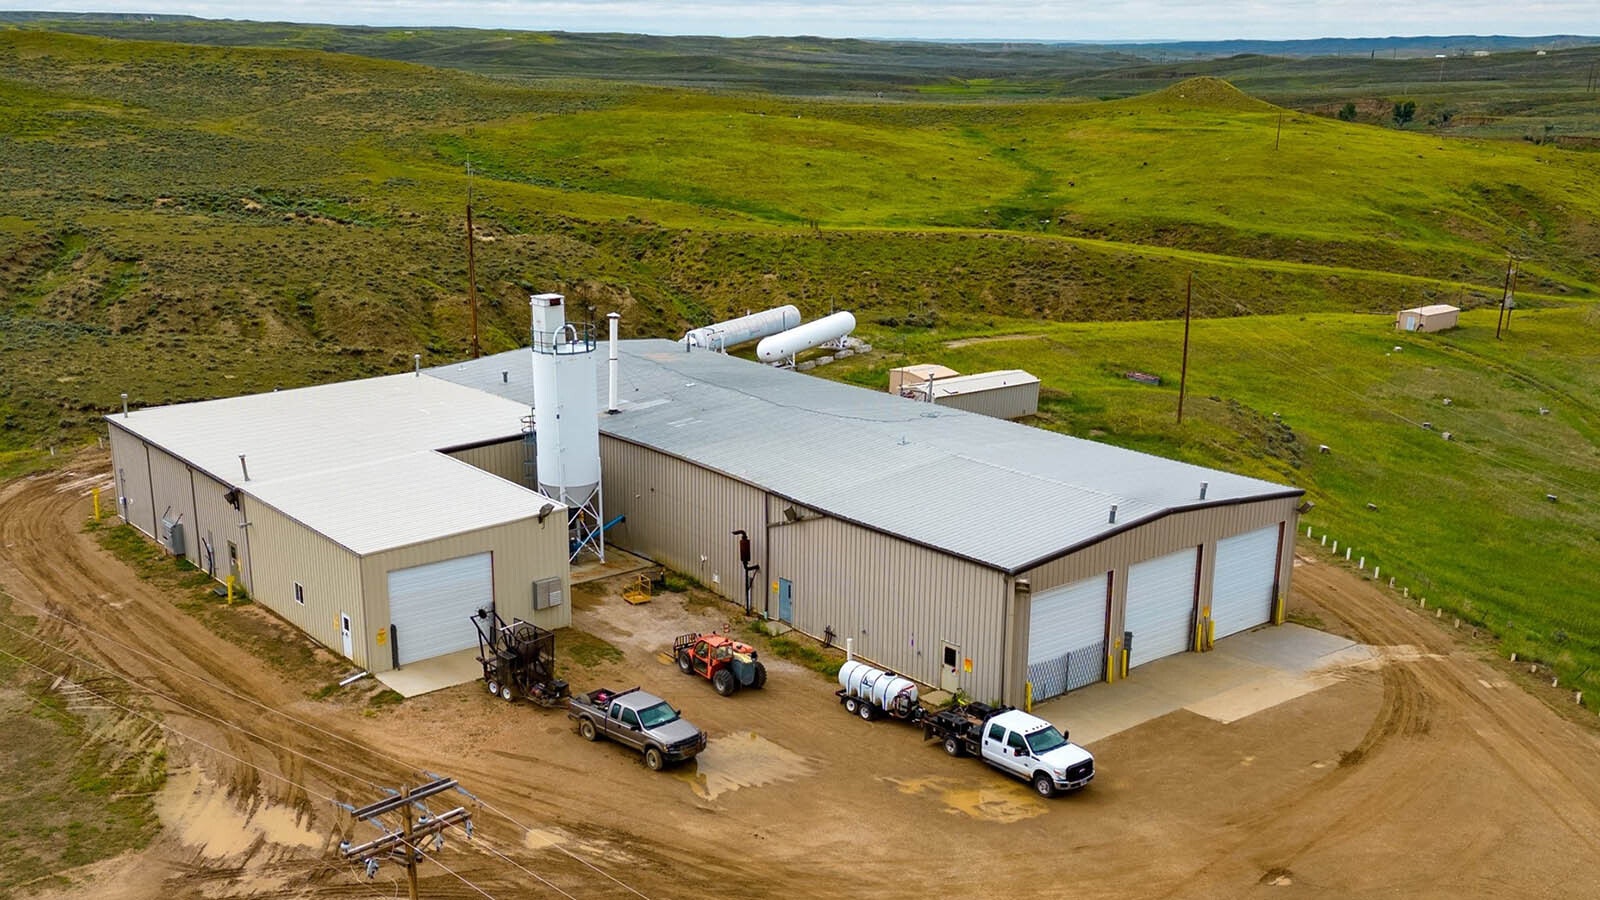 A satellite plat at Uranium Energy Corp's Christensen Ranch site in Wyoming. TerraPower's new nuclear plant planned for Kemmerer could run on Wyoming uranium.